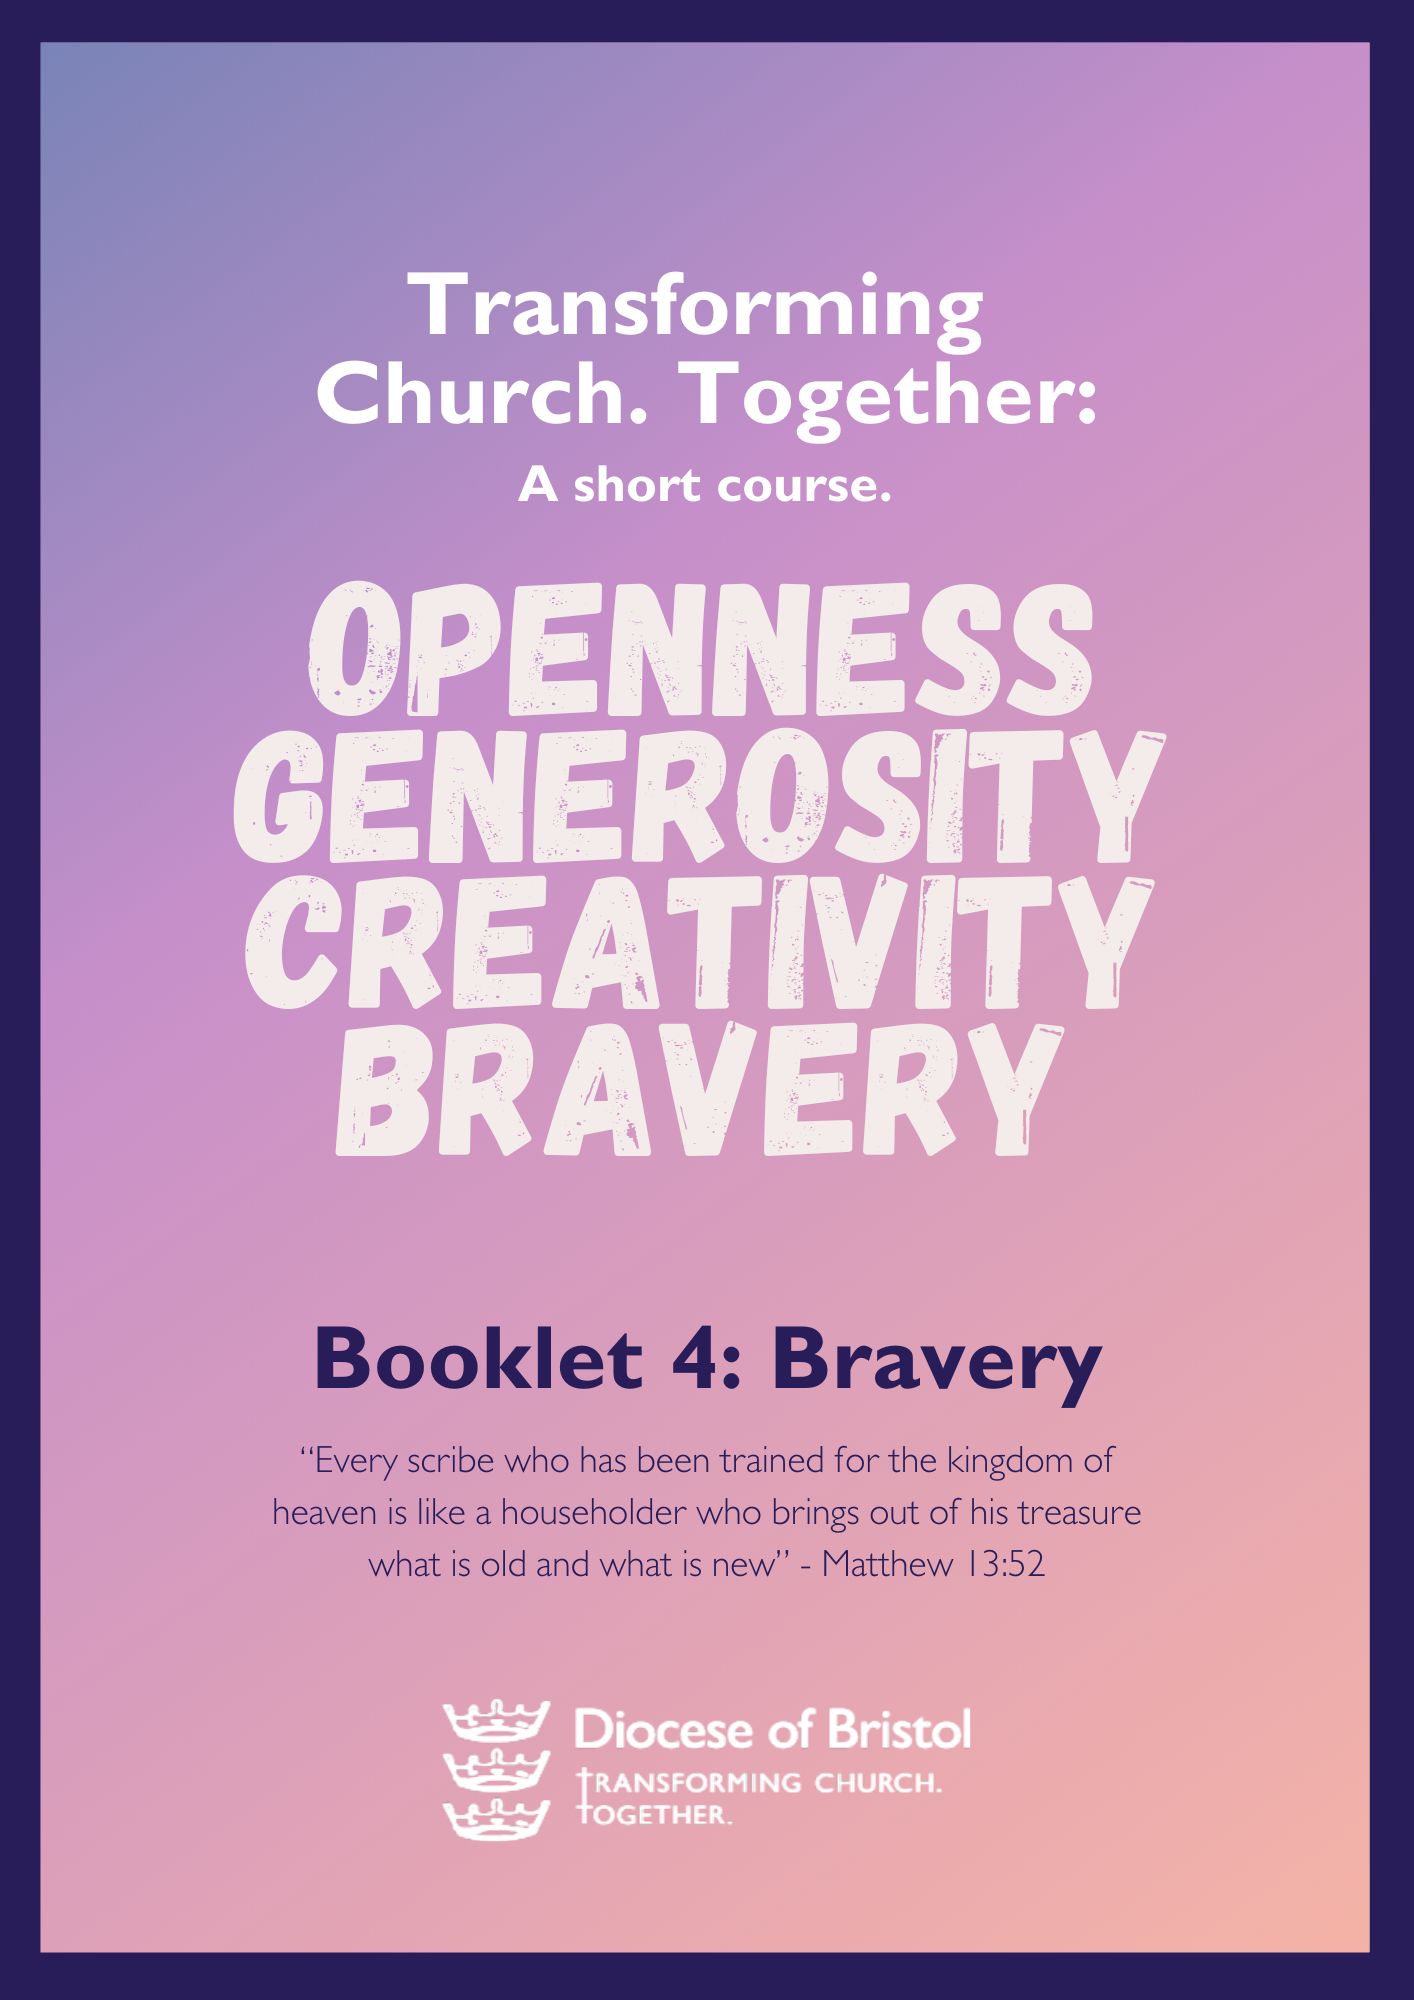 Booklet four: Bravery